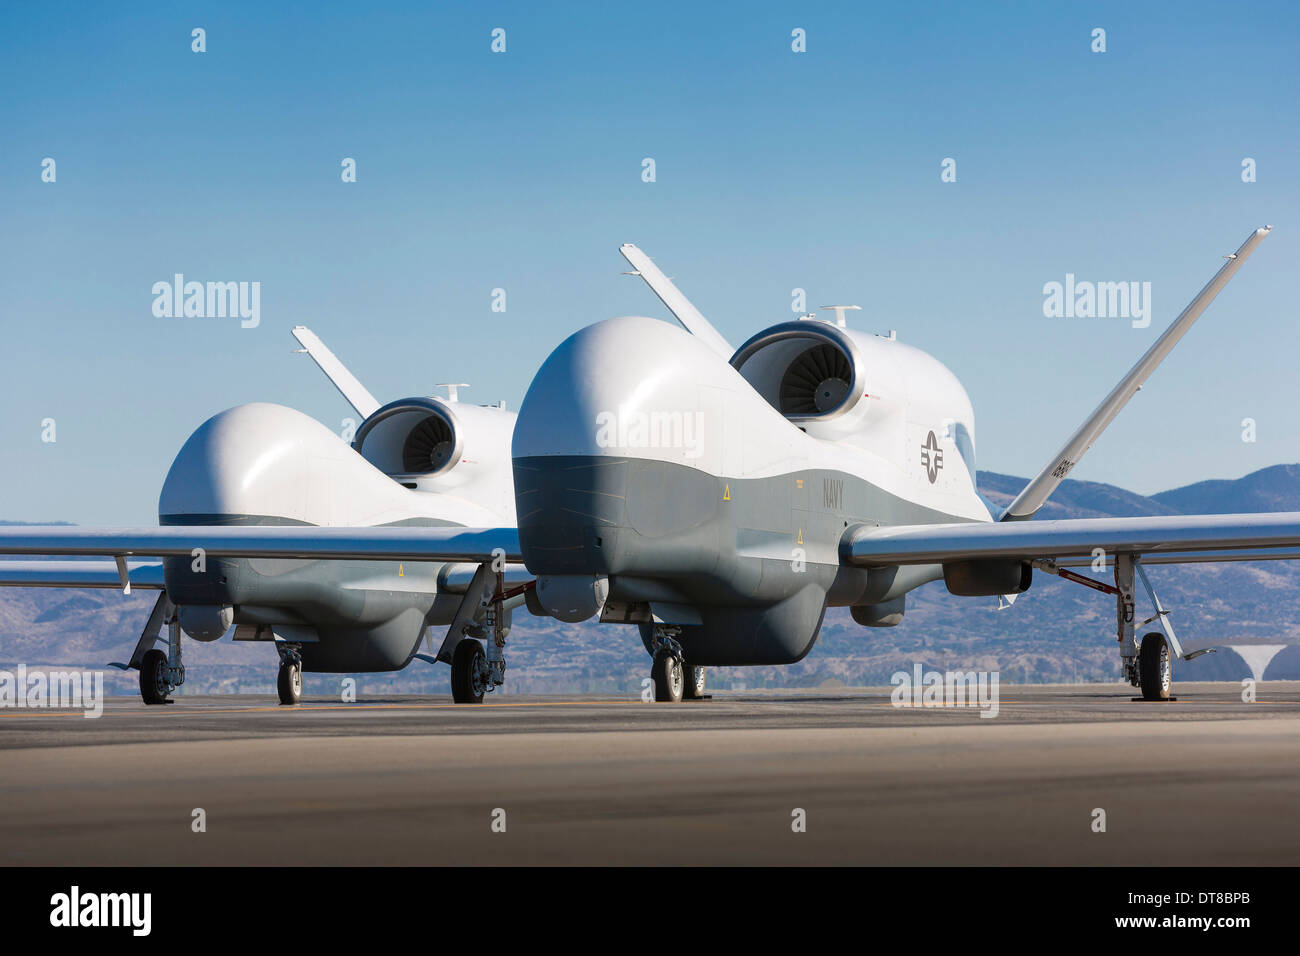 Two MQ-4C Triton unmanned aerial vehicles on the tarmac. Stock Photo